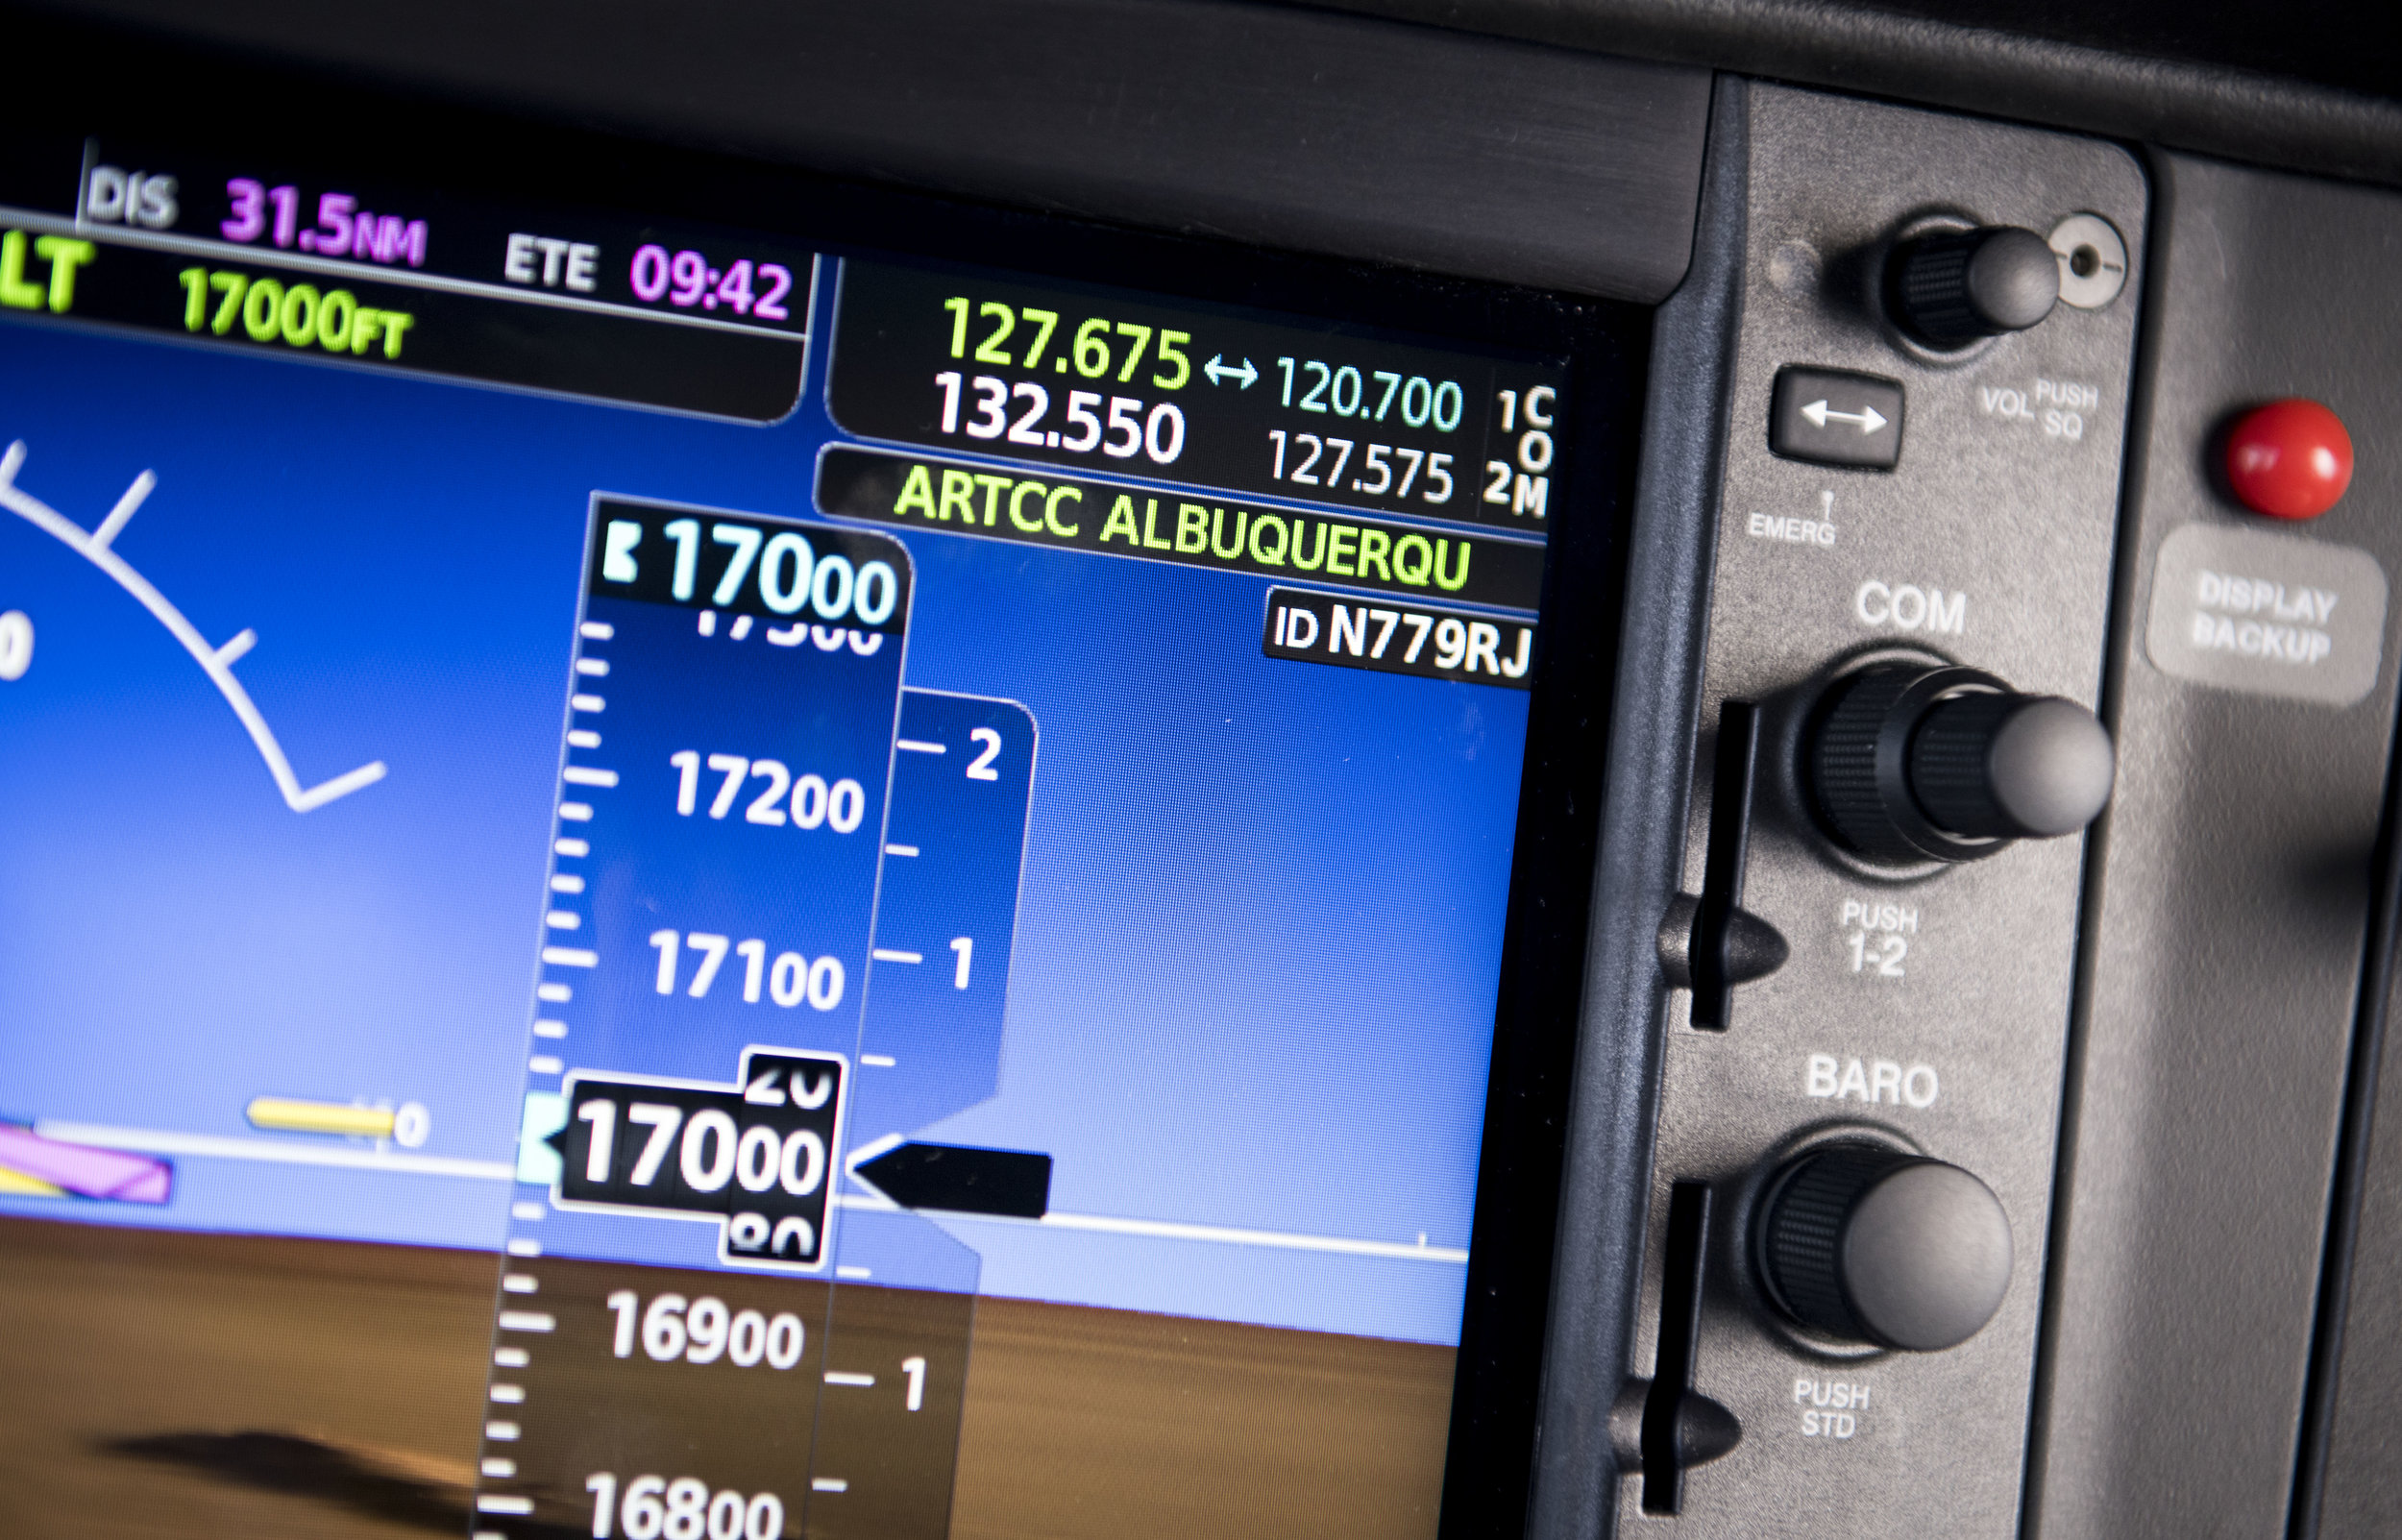 Garmin Perspective avionics featuring the G1000 provides superior situational awareness on every flight